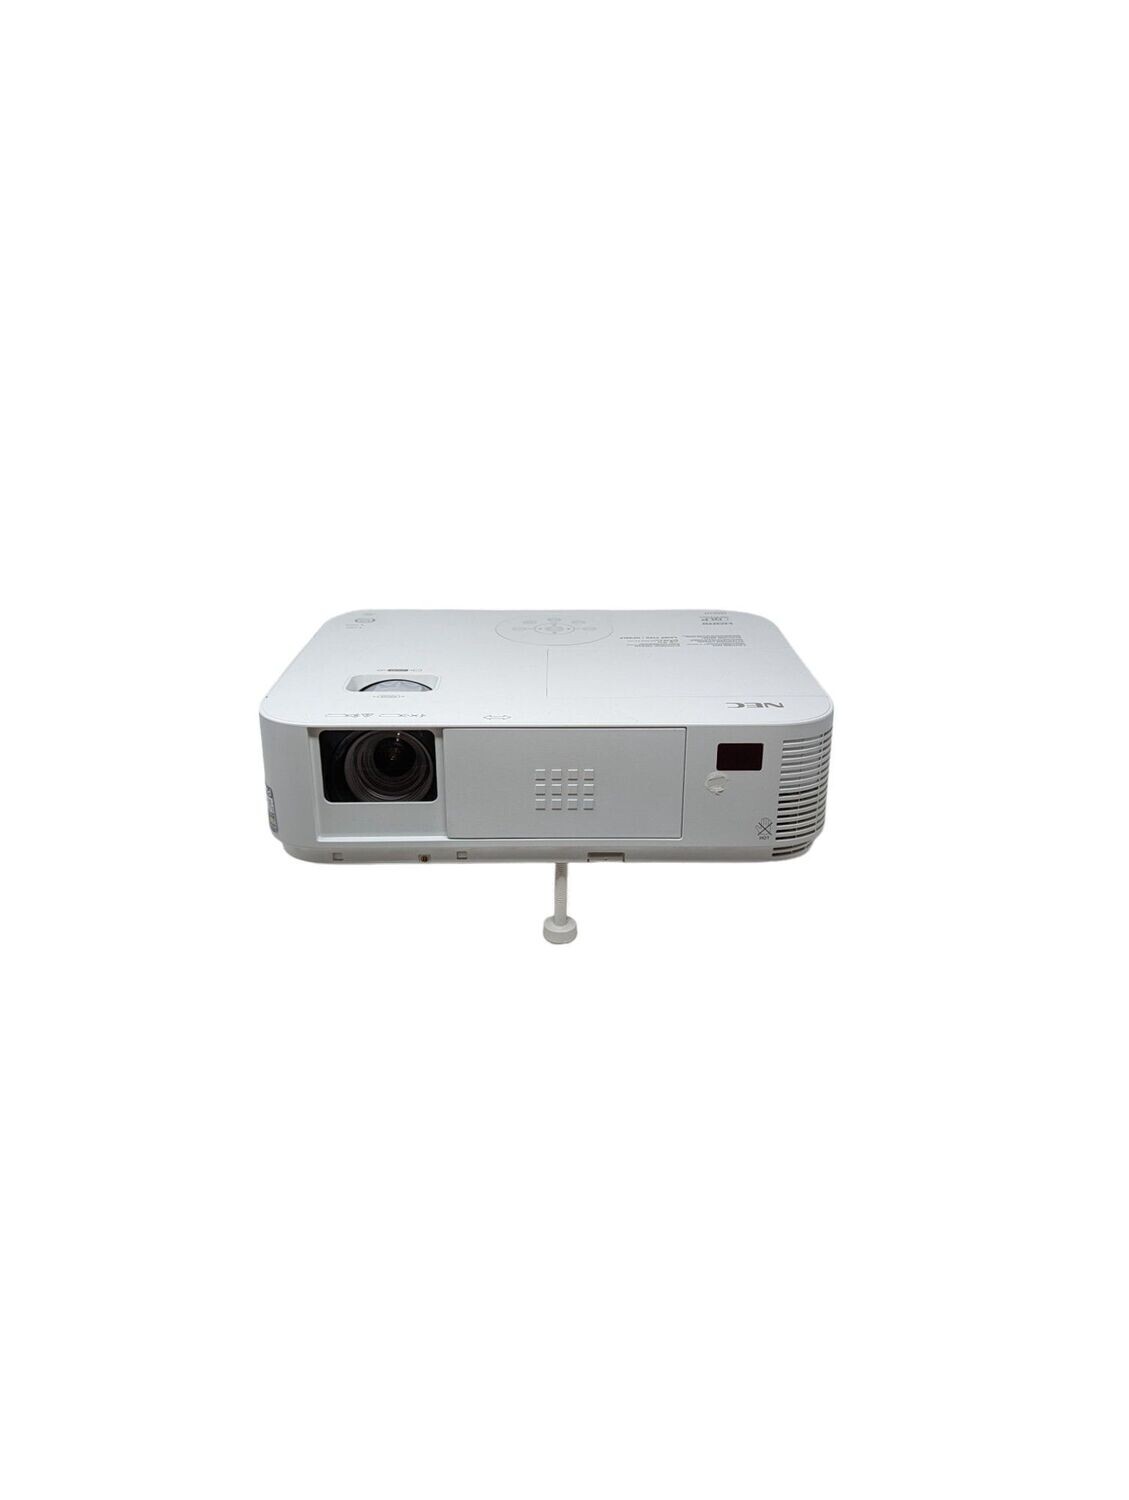 NEC NP-M402H 1080P Conference Room Projector 1548 Lamp Hours